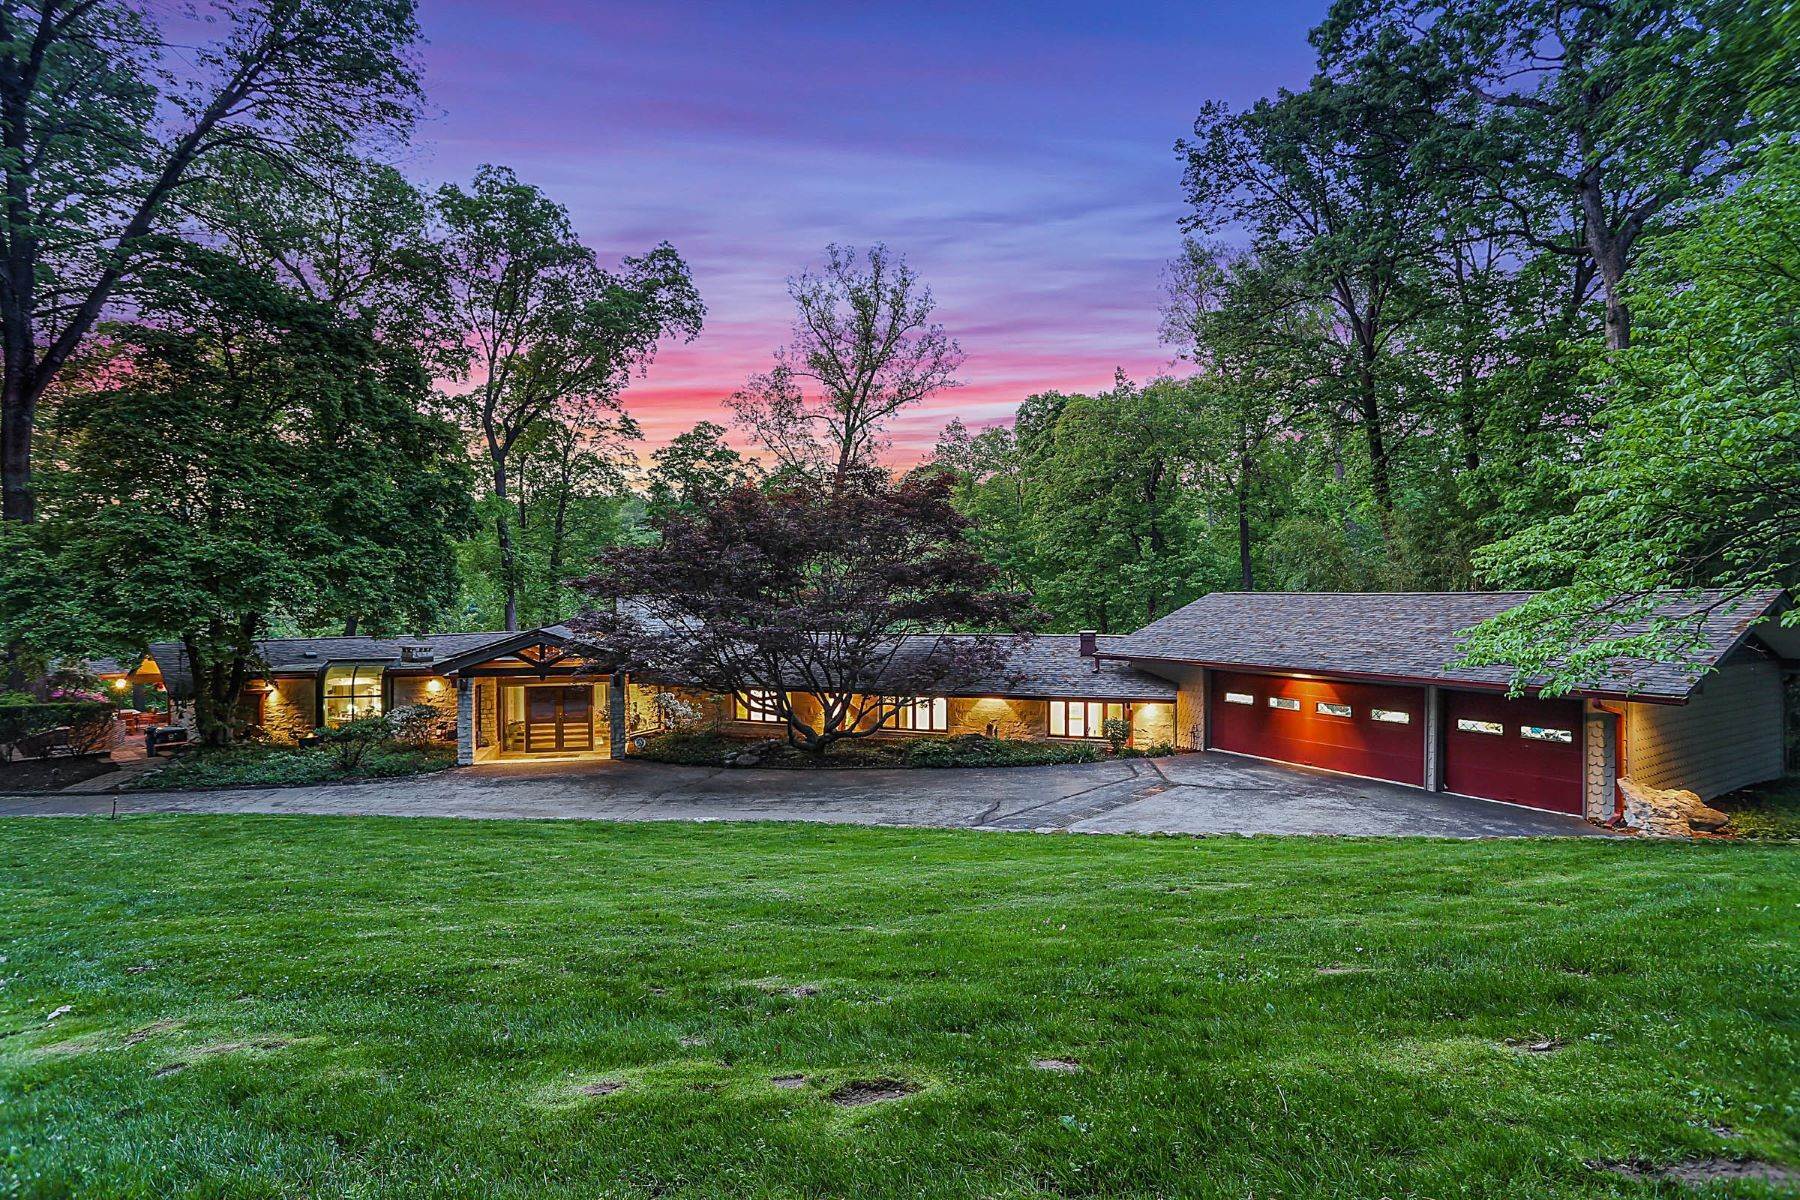 Property for Sale at A Lakefront Mid-Century Estate in Chesterfield 6 Arrowhead Estates Ct Chesterfield, Missouri 63017 United States